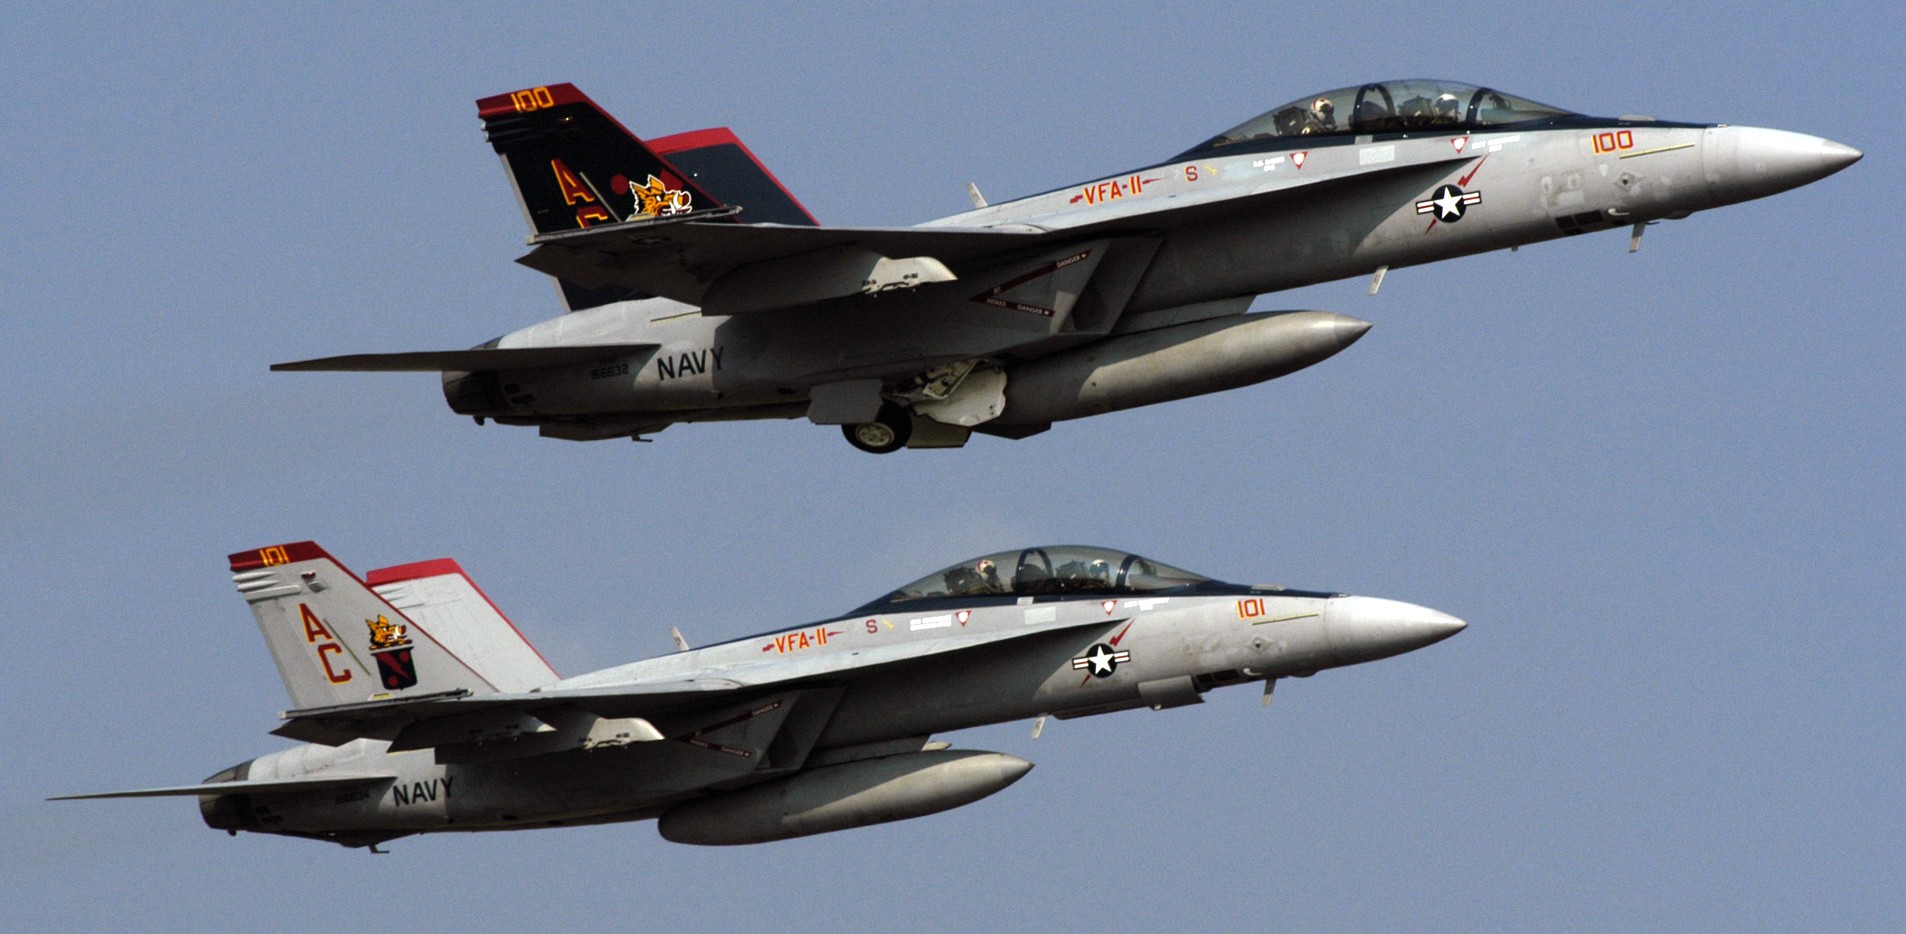 vfa-11 red rippers strike fighter squadron us navy boeing f/a-18f super hornet 67 nas oceana virginia